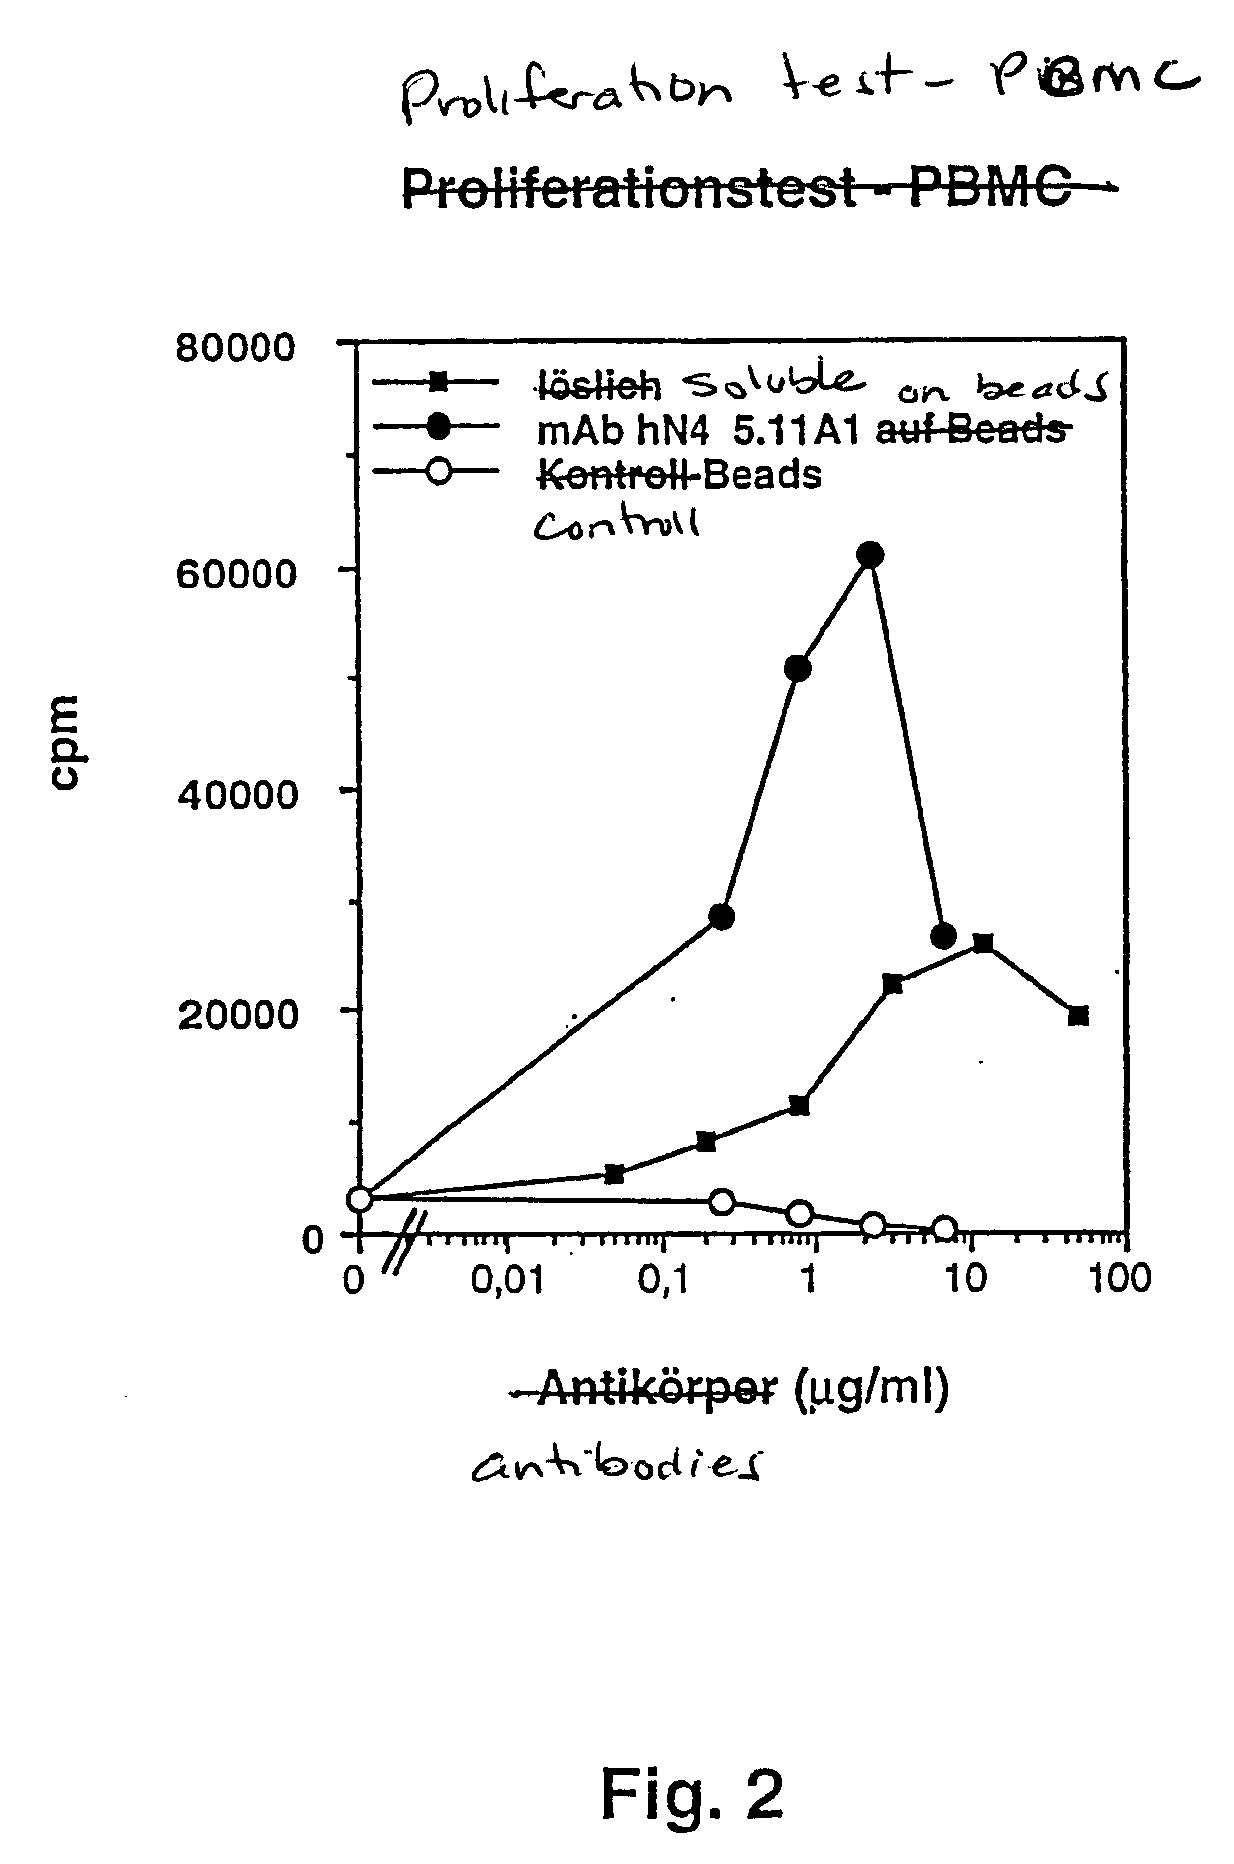 Microparticle with cd28-specific monoclonal antibodies